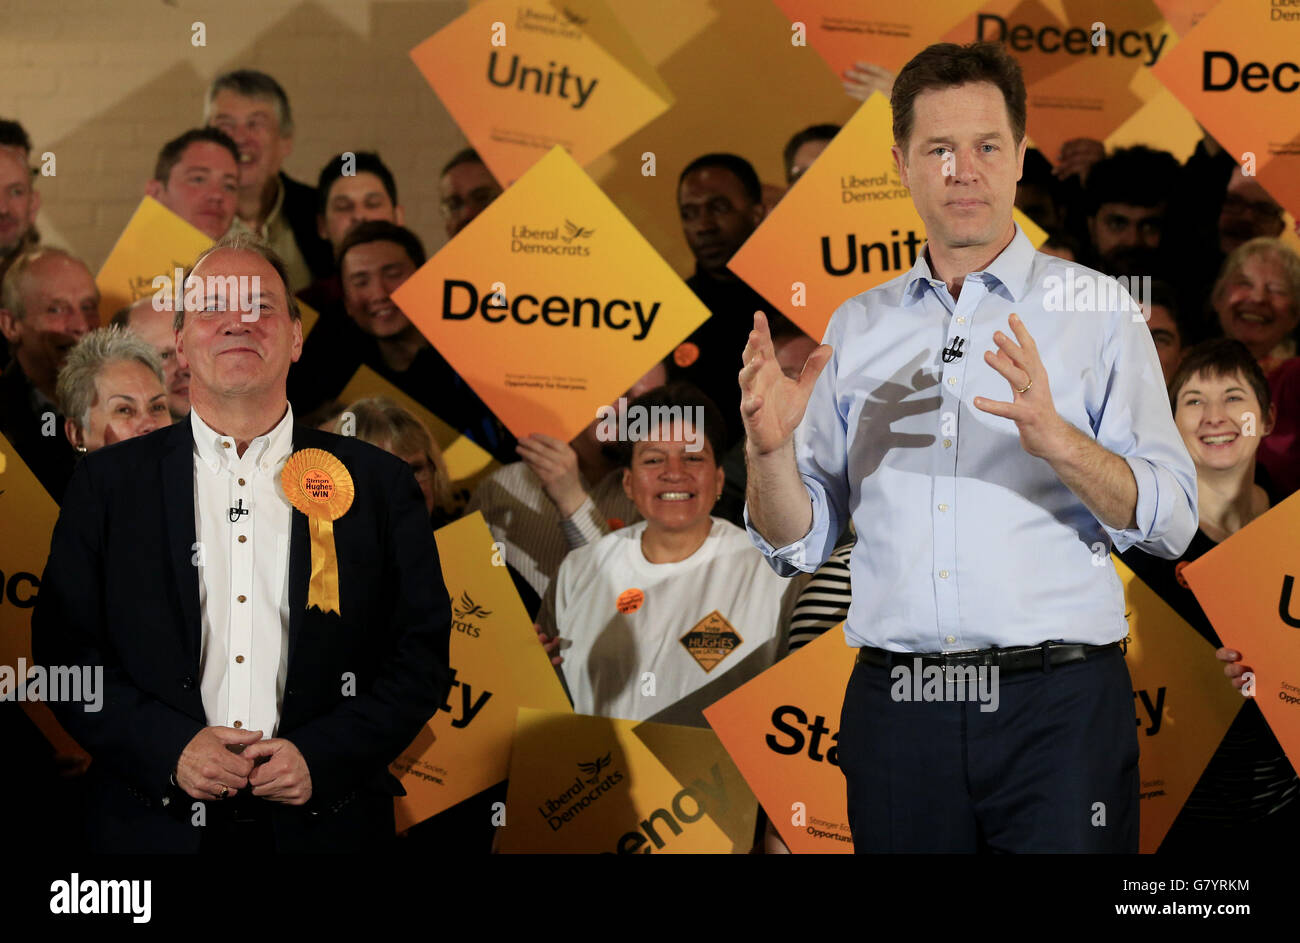 Liberal Democrat Party leader Nick Clegg speaks to supporters as parliamentary candidate for Bermondsey and Old Southwark Simon Hughes (left) looks on at the Rennie and Manor Estates Tenants Association Hall in Bermondsey, London. Stock Photo